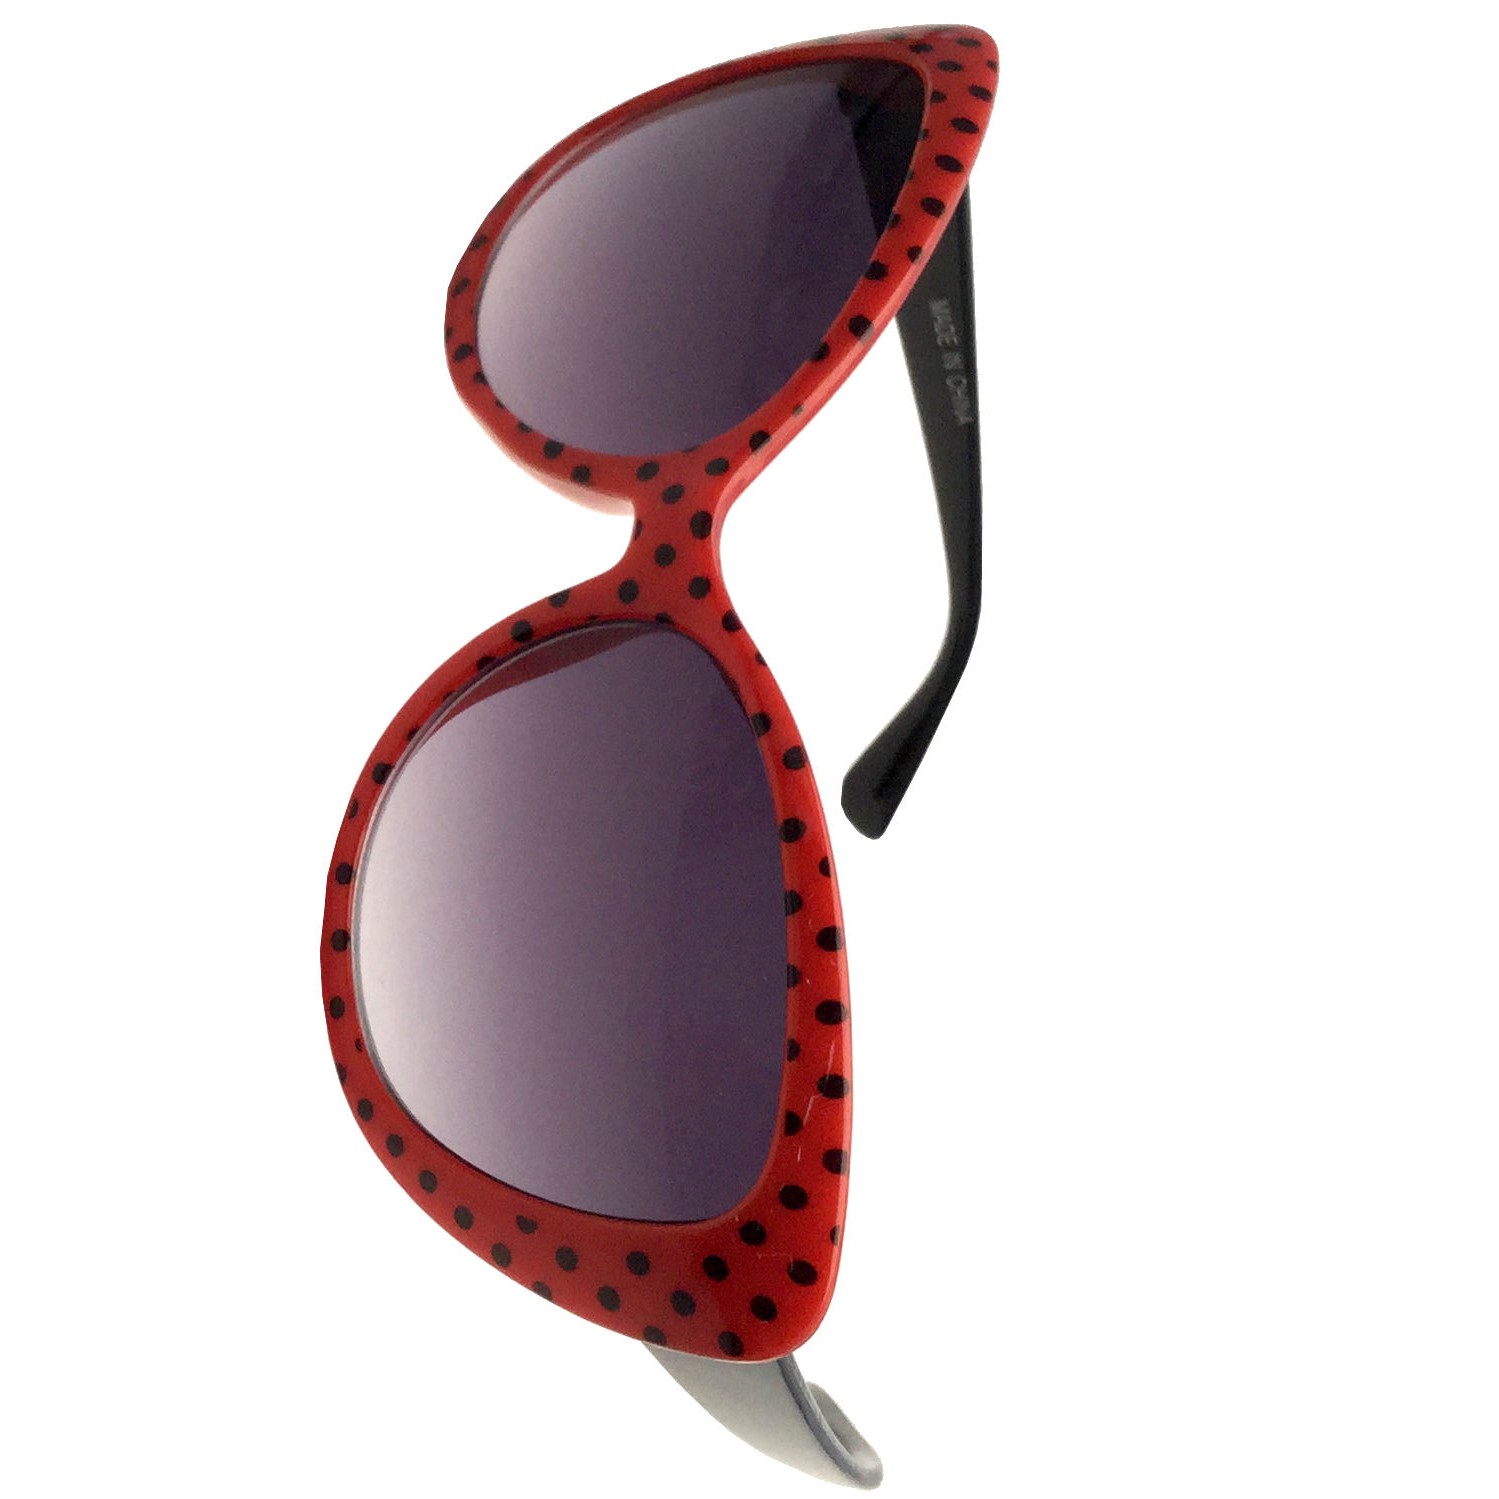 grinderPUNCH GIRLS Kids Fashion Sunglasses Cat Eye Polka Dot 50s/60s Retro Vintage Style Age 2-12 Red - image 2 of 5